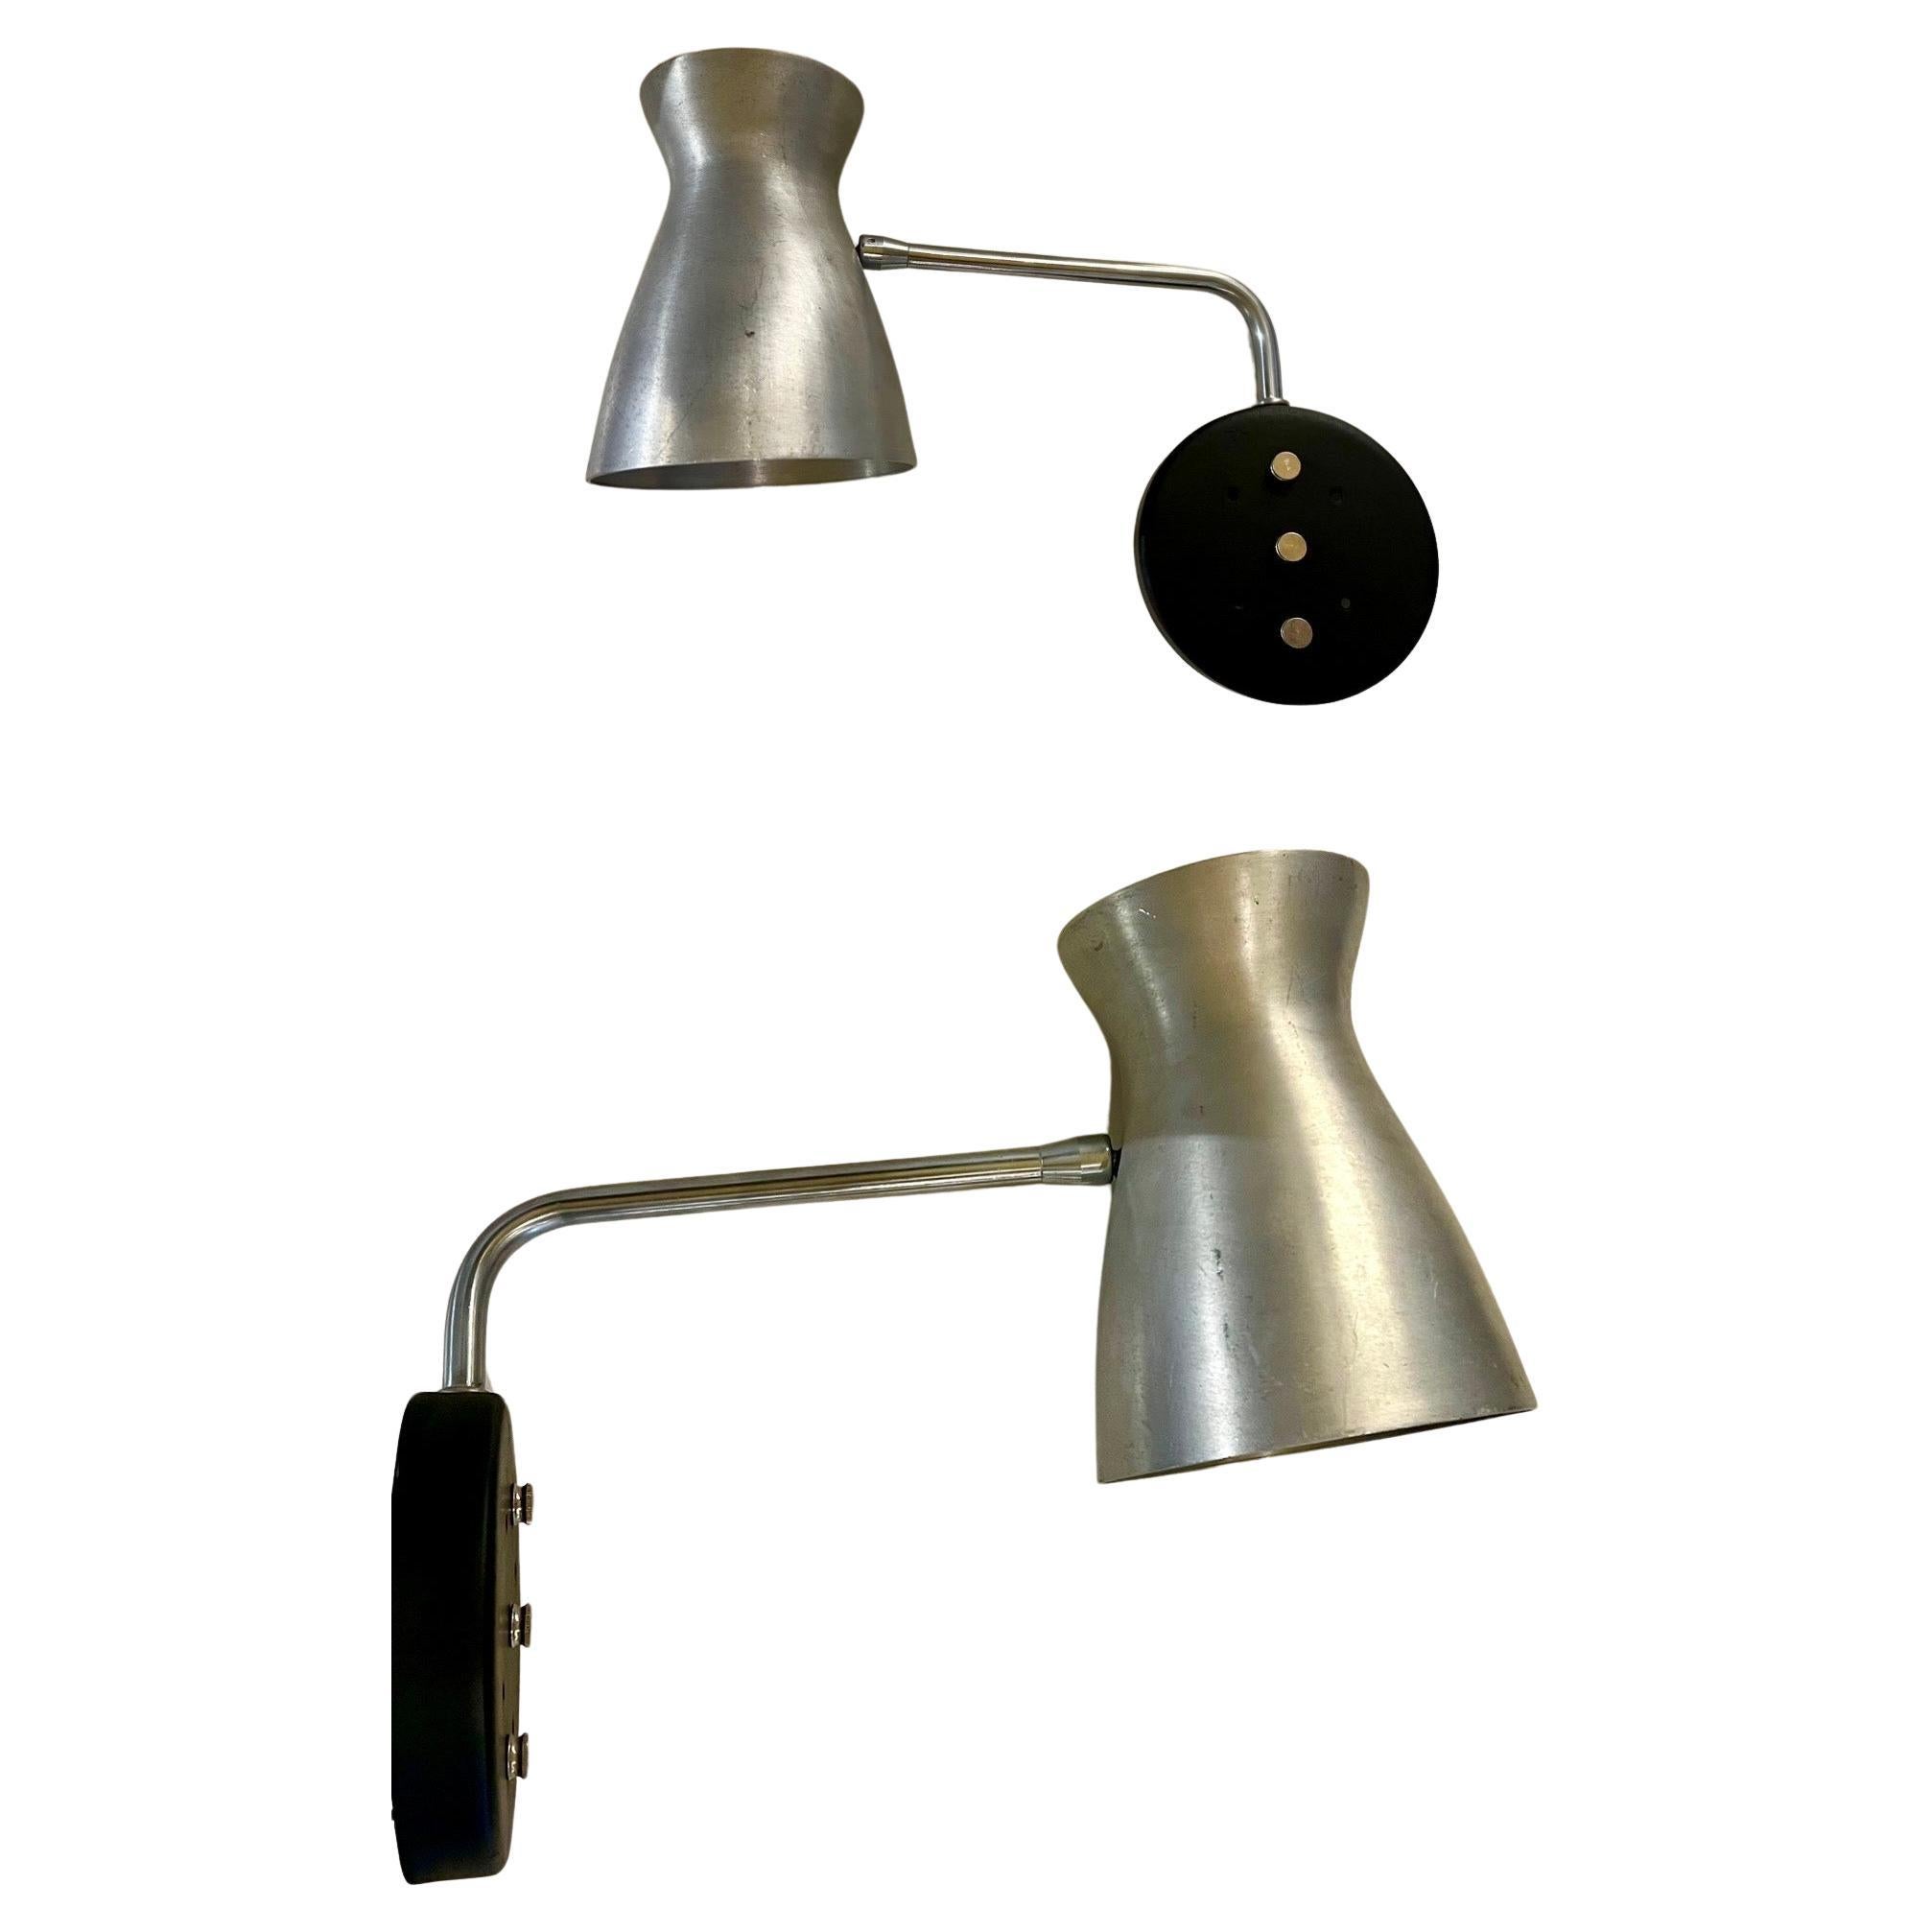 1950s American Mid-Century Atomic Age Pair of Aluminum Wall Sconces For Sale